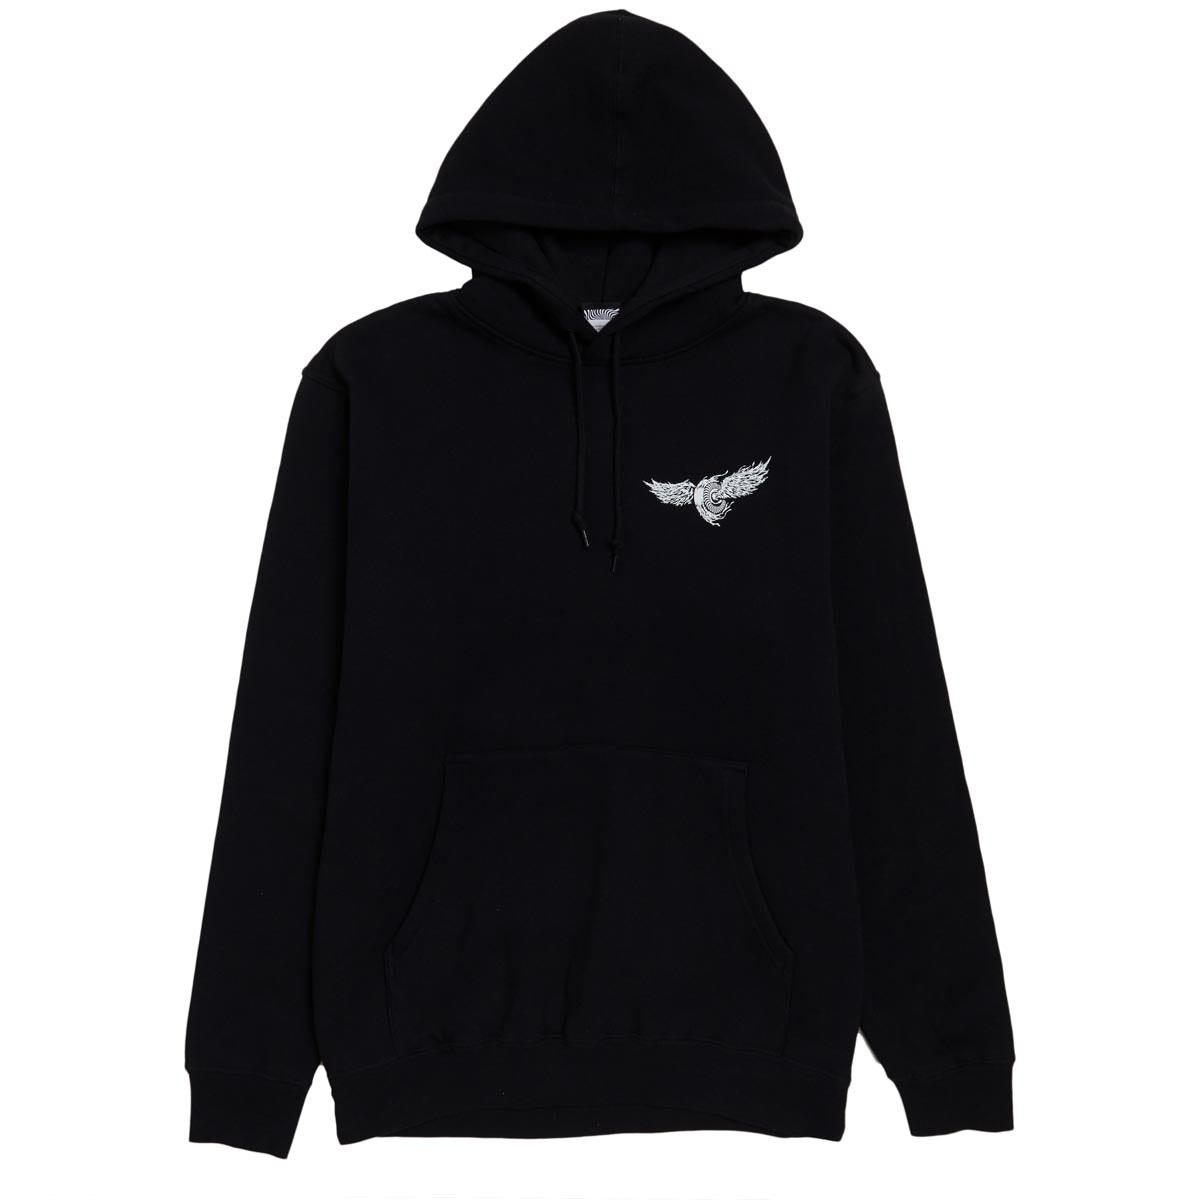 Spitfire Decay Flying Classic Hoodie - Black image 2